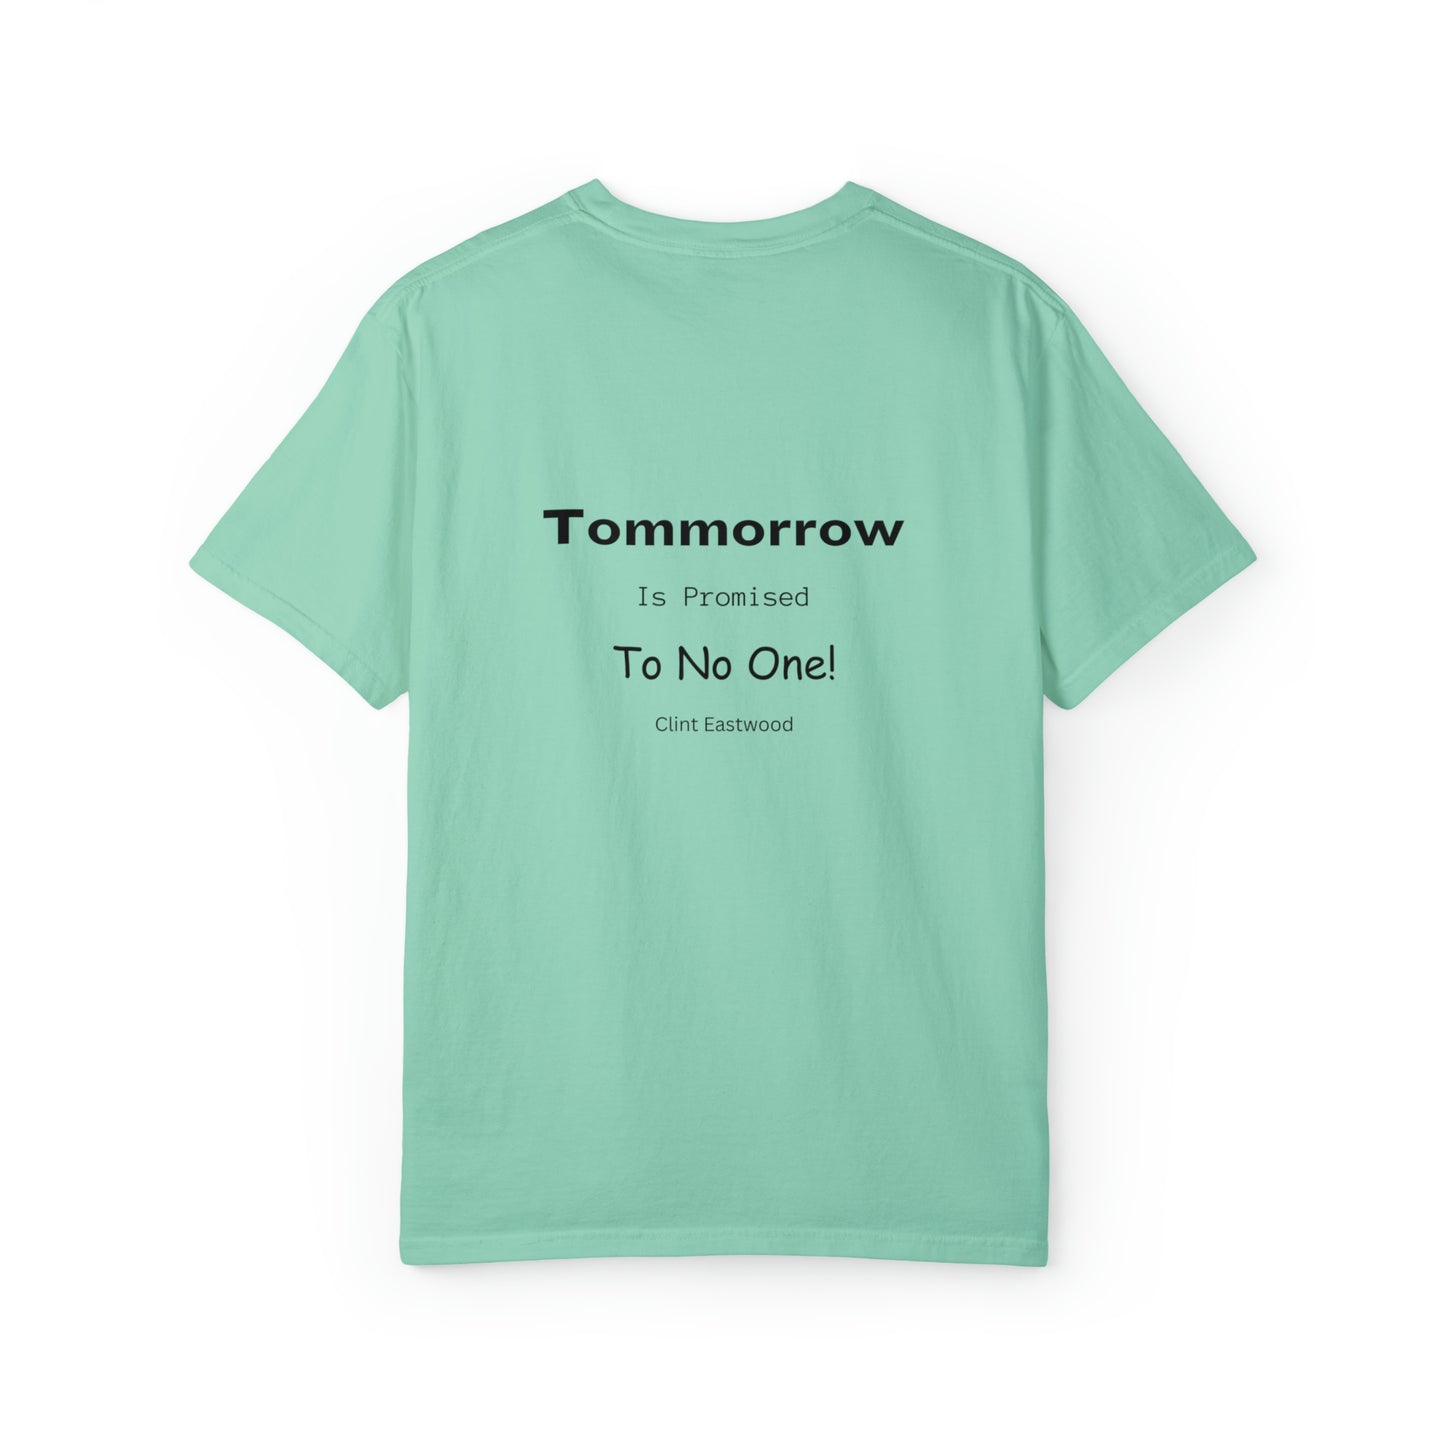 "Tomorrow is Promised to No One!" Unisex Garment-Dyed T-shirt